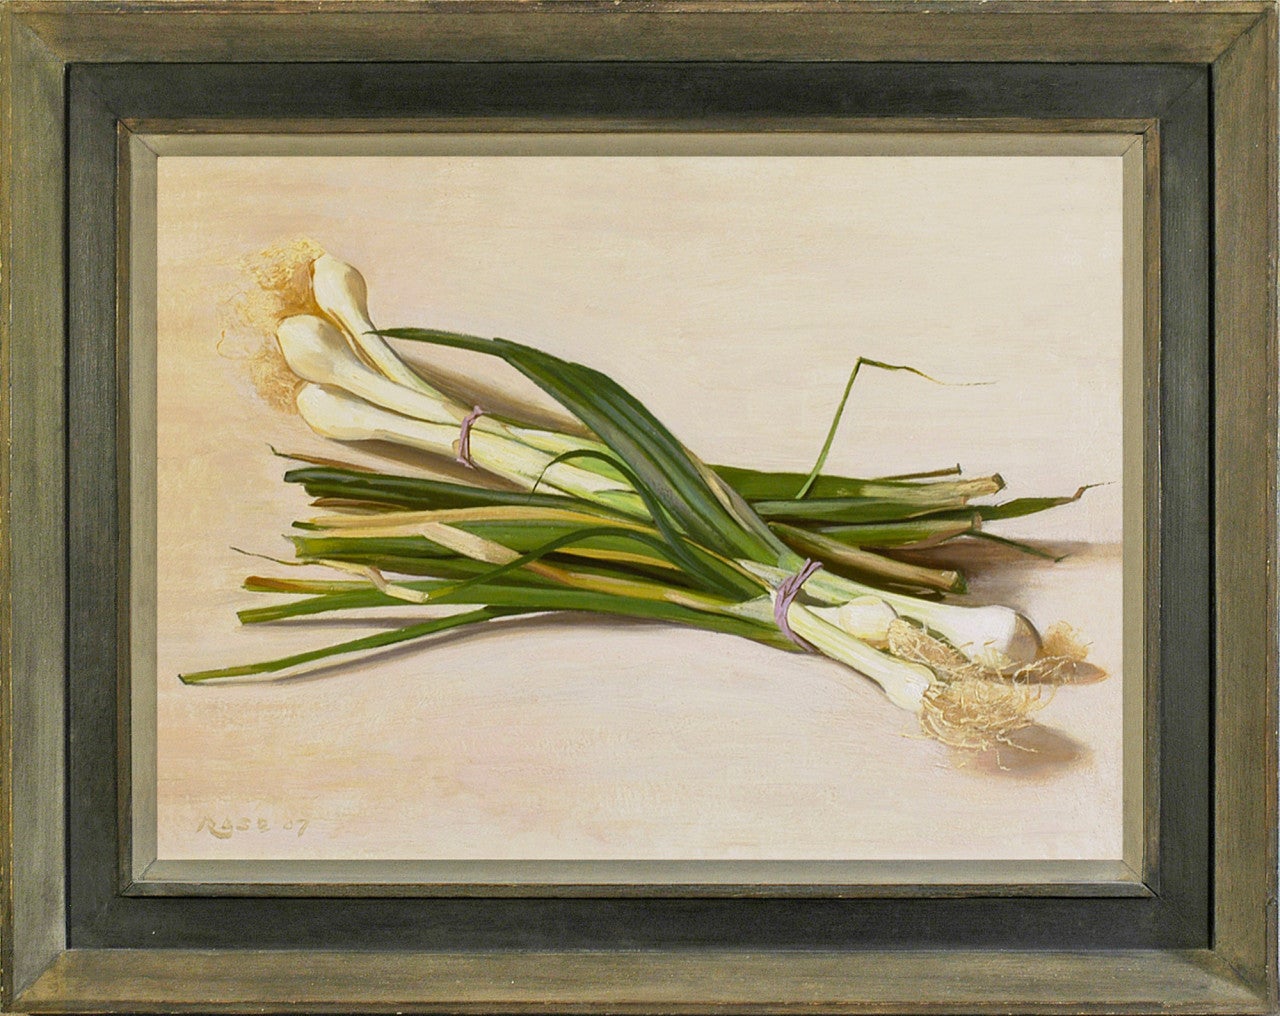 Spring onions - Painting by Stephen Rose